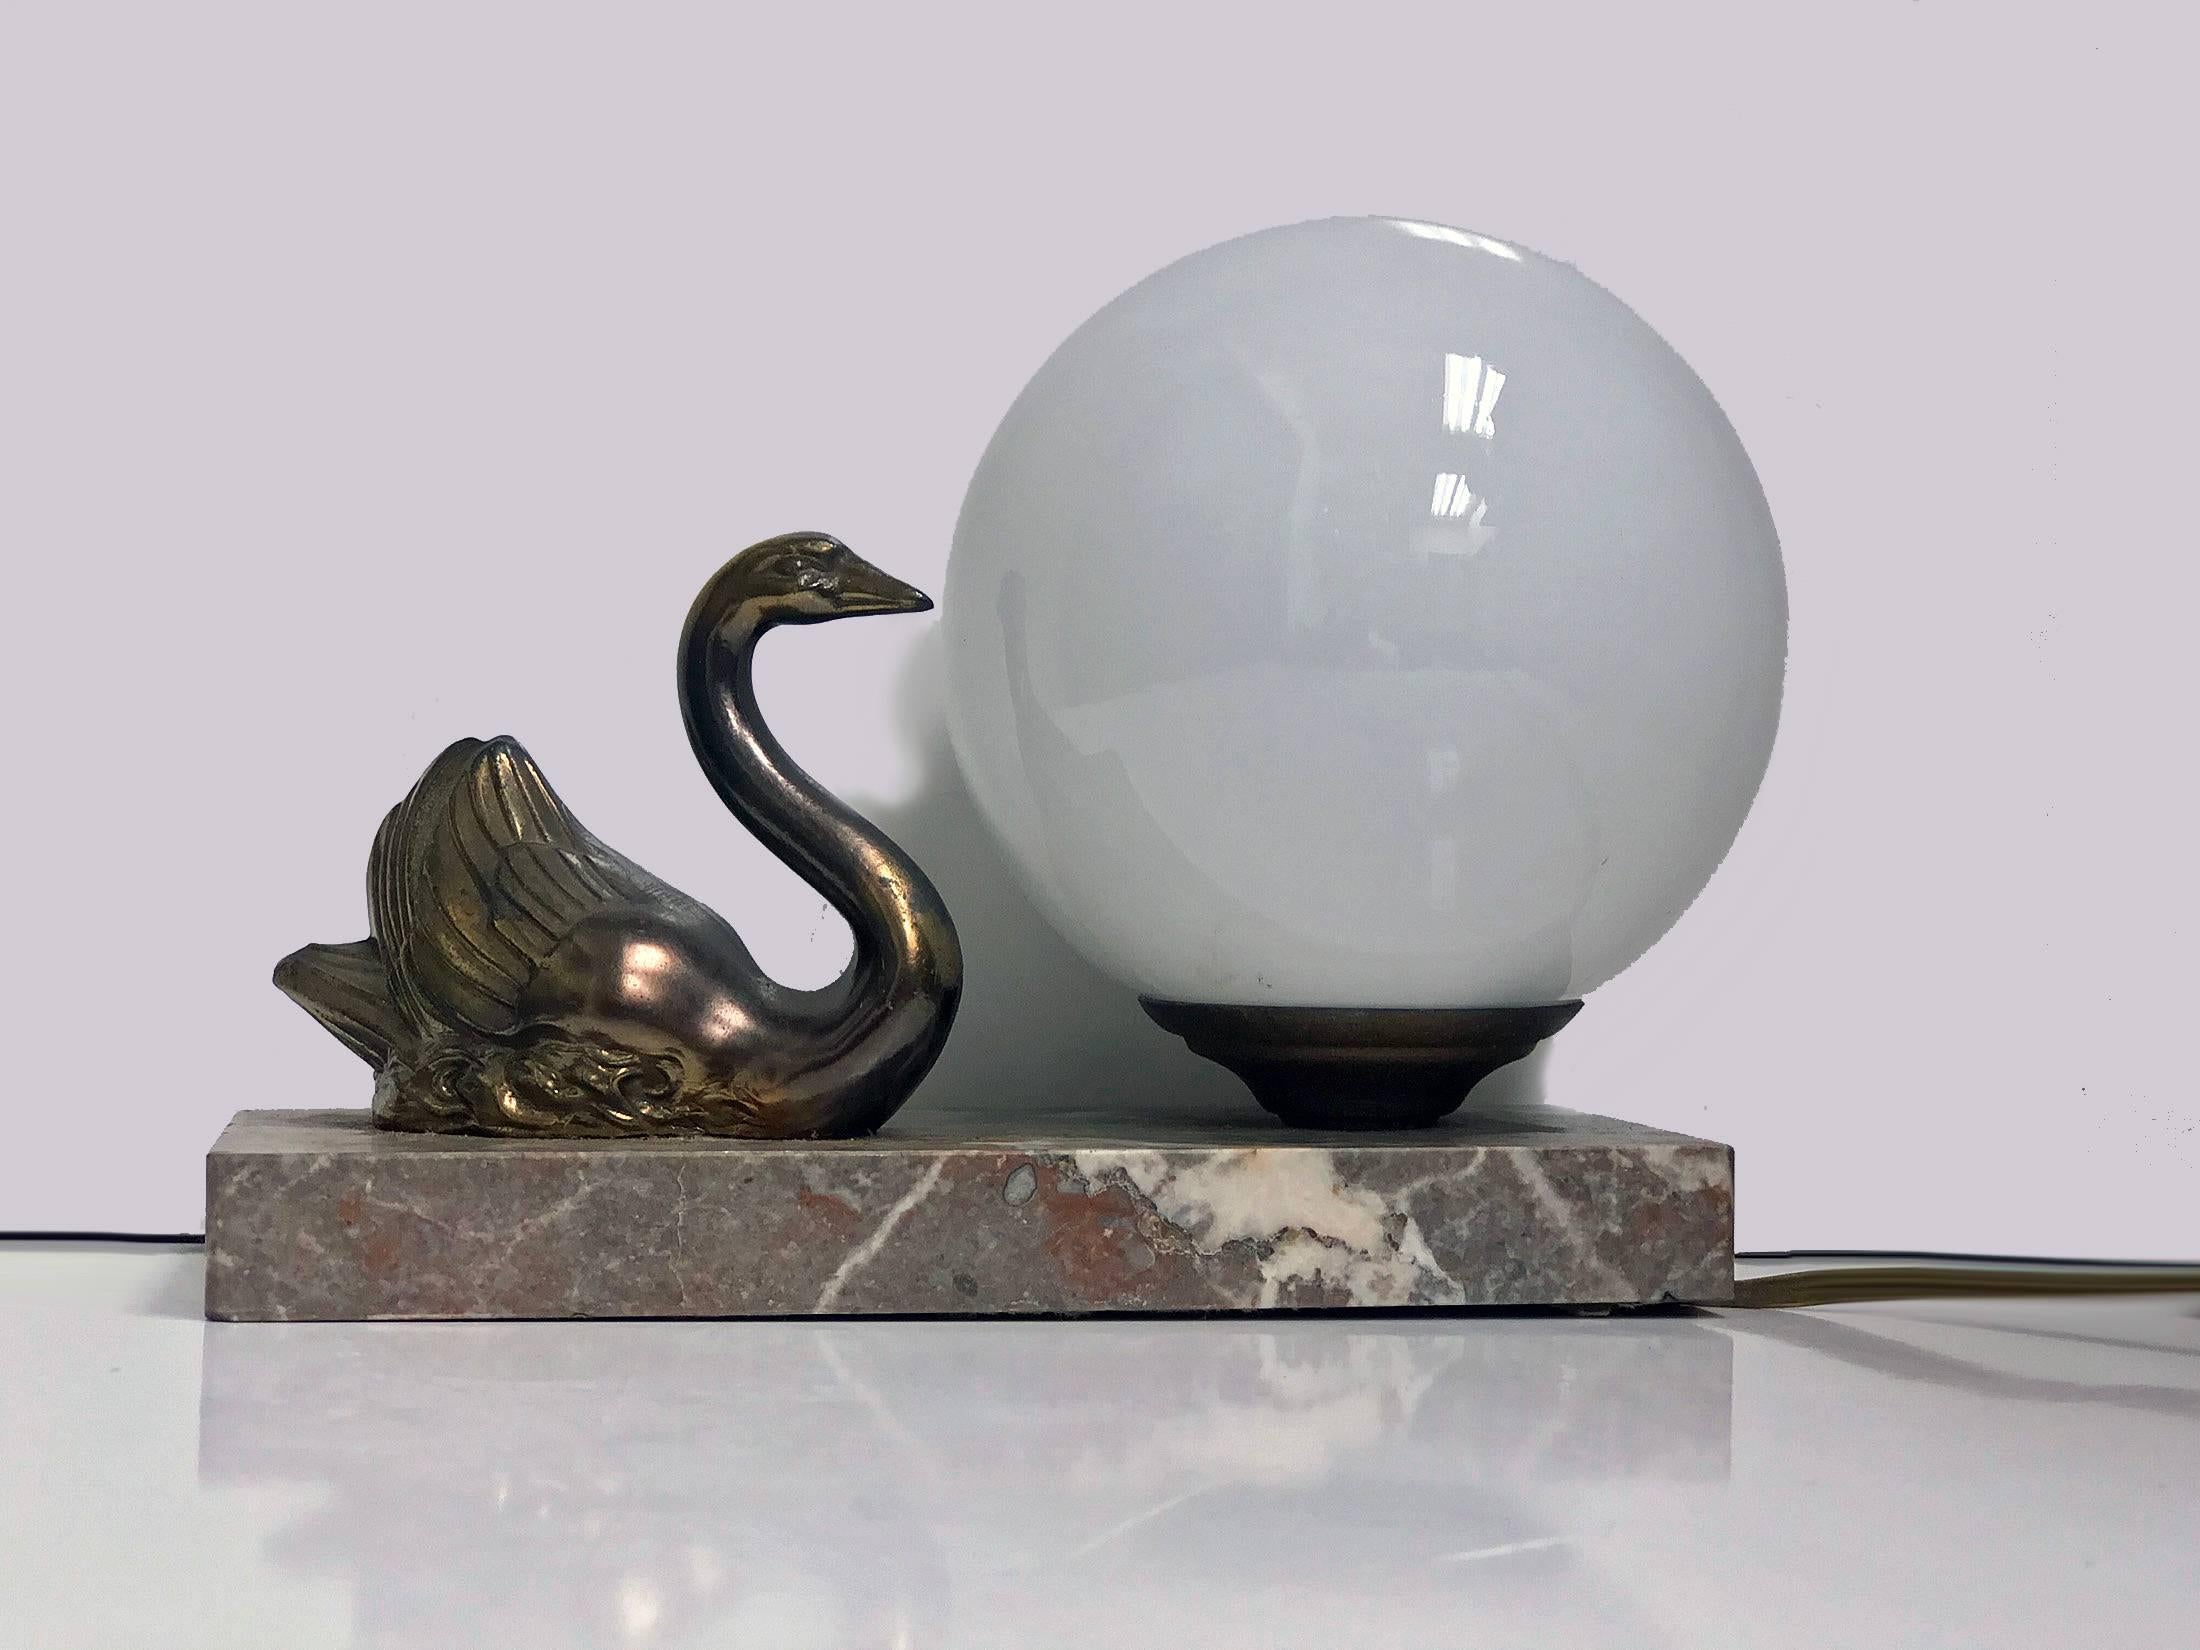 French Art Deco swan lamp, circa 1930. The lamp with a spelter sculpture of Swan on marble base with tones of orange, brown and white, milk glass spherical lamp shade. Measures: Approximately 7.75 x 3.2 x 6.0 inches.